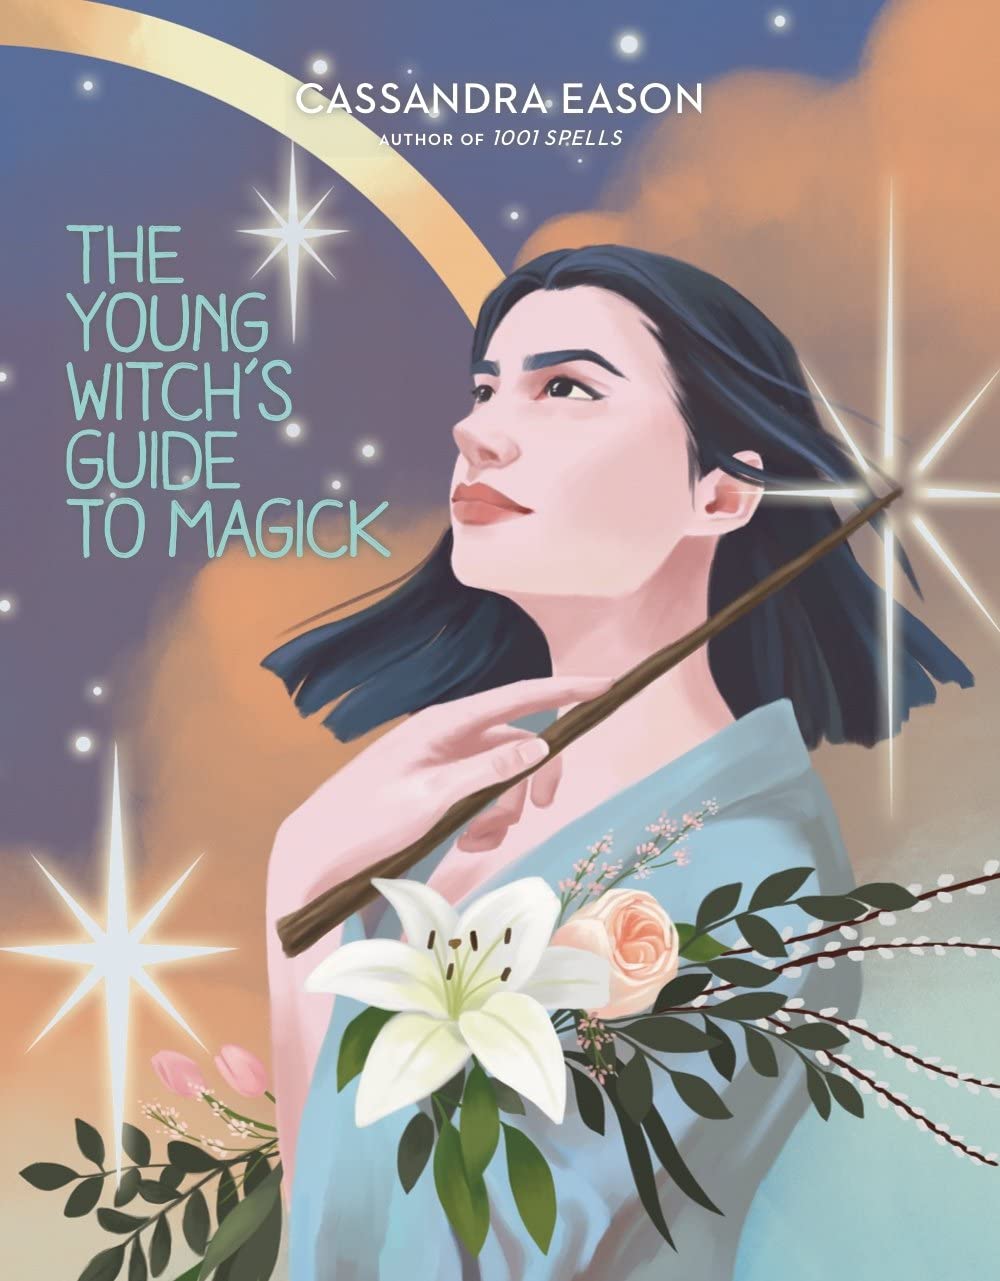 The Young Witch's Guide to Magick